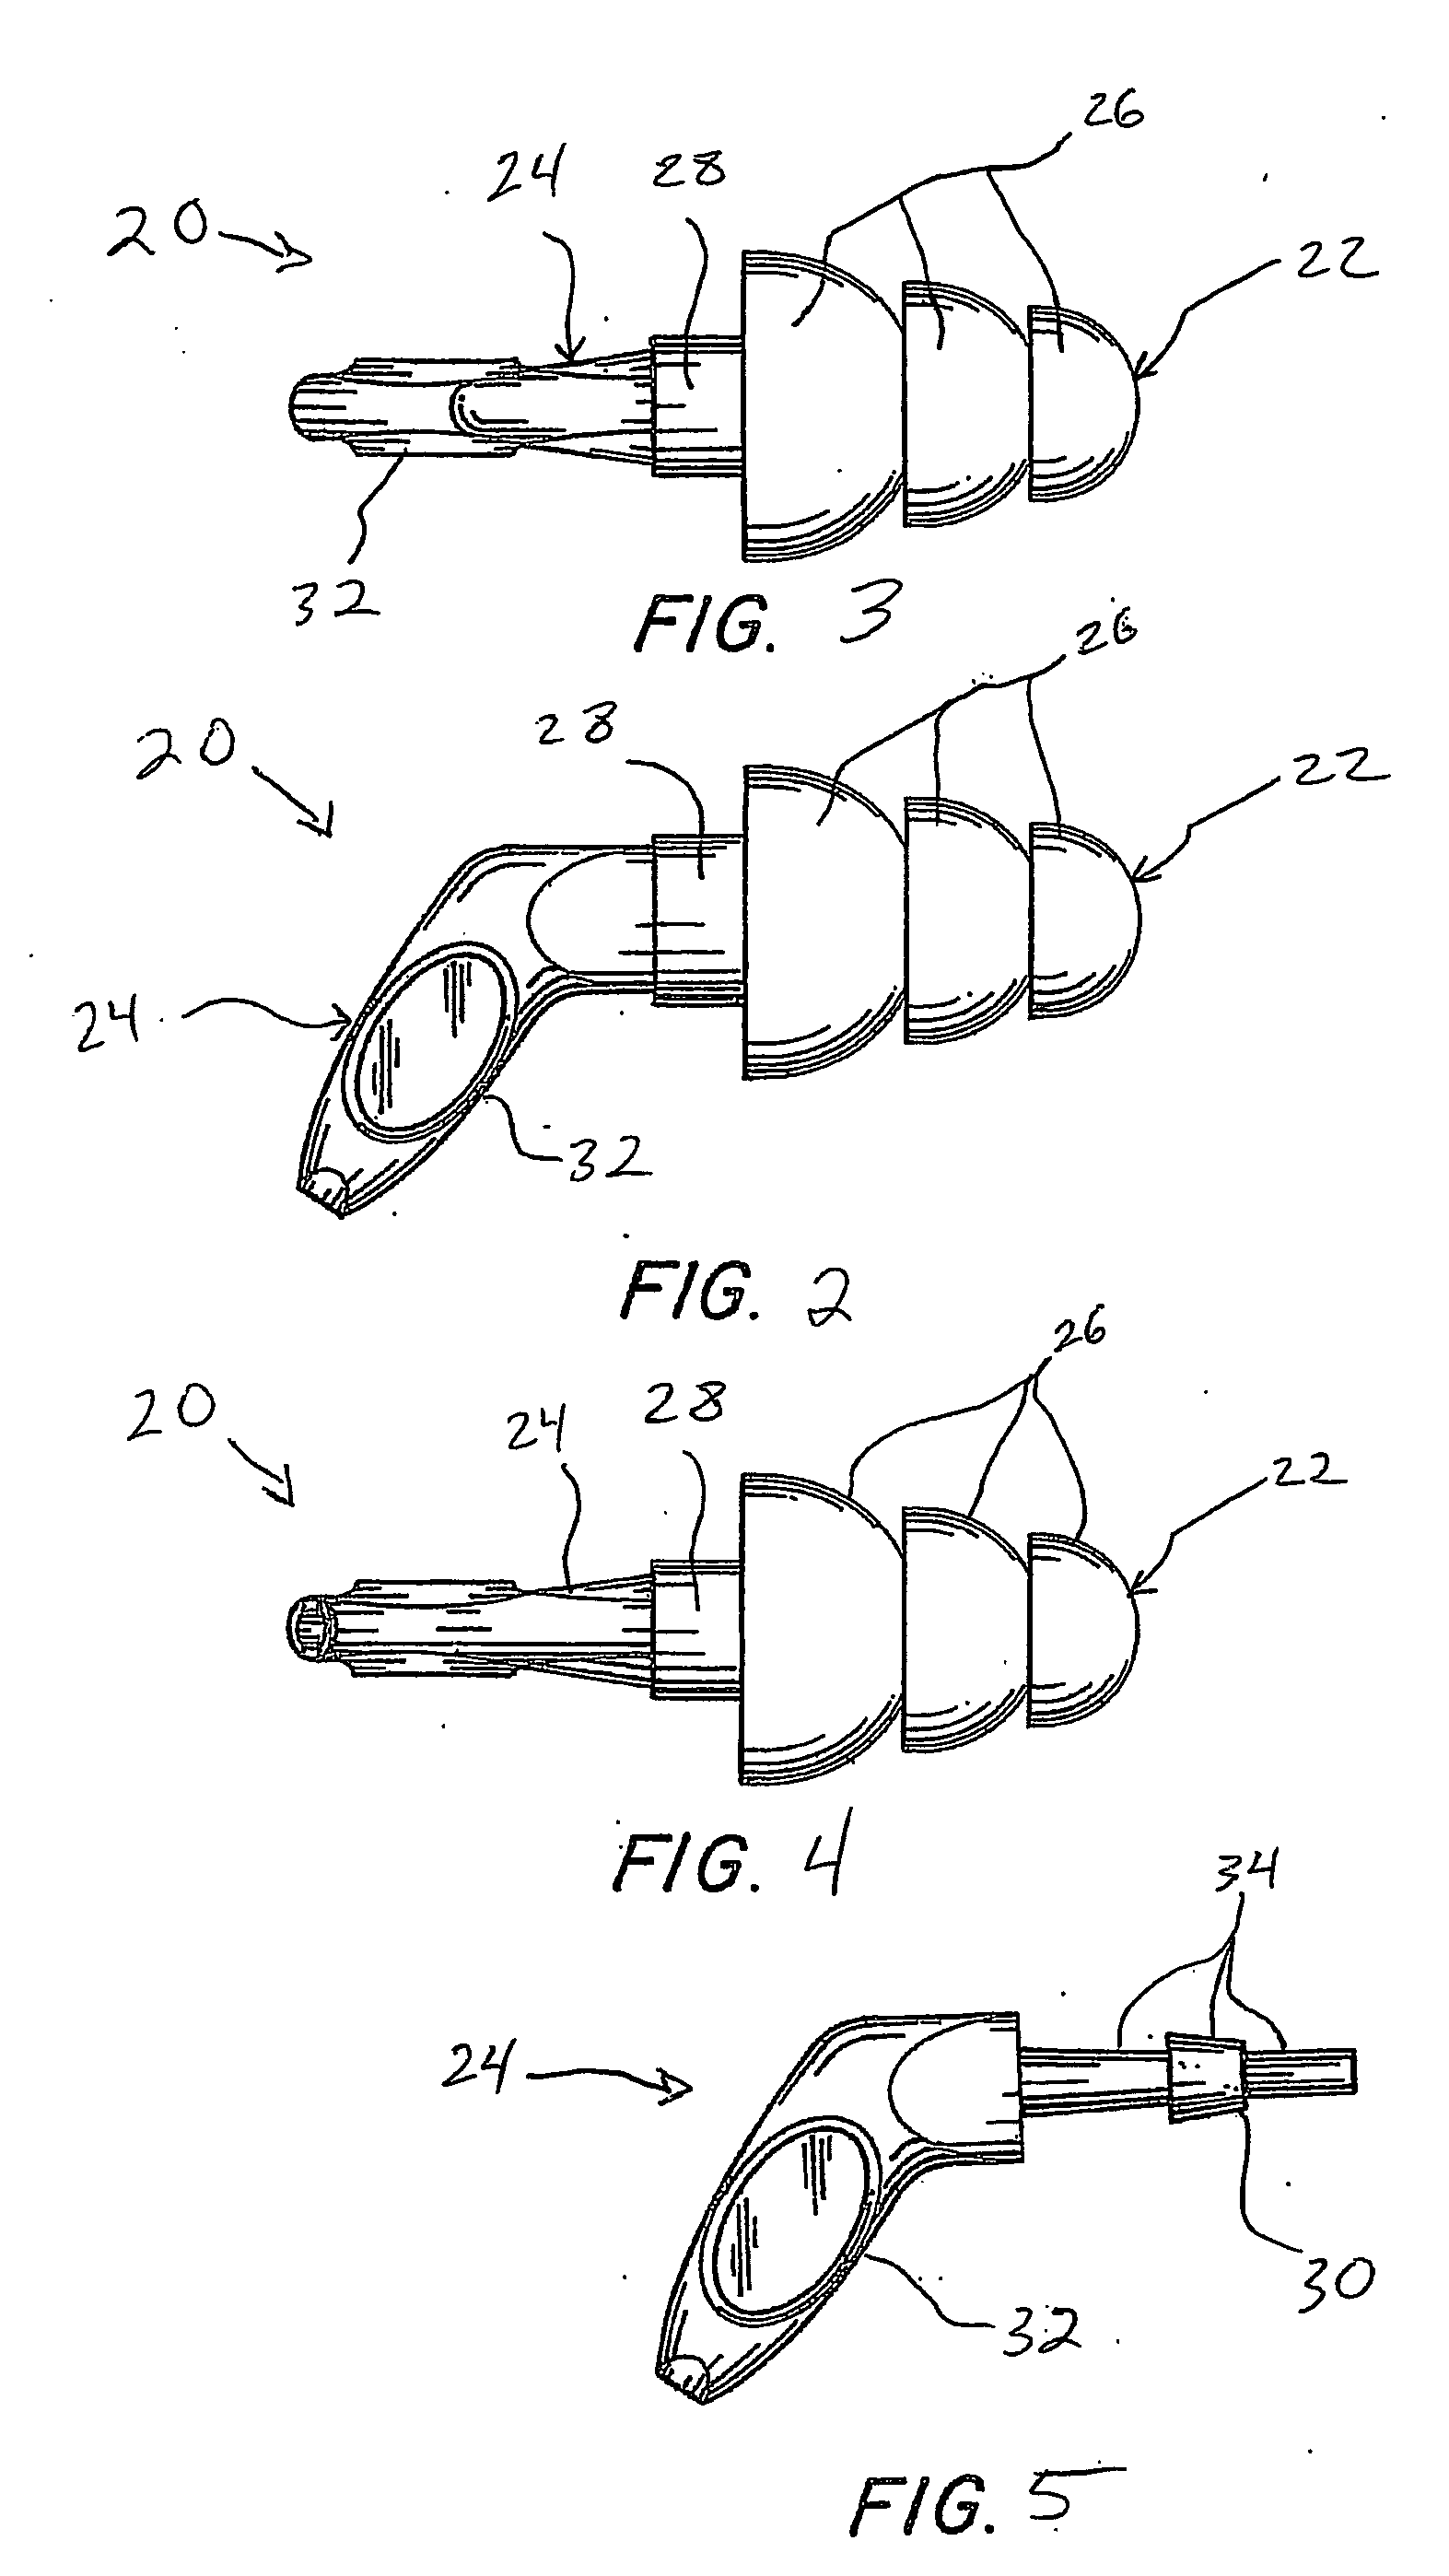 Hearing protection device with damped material